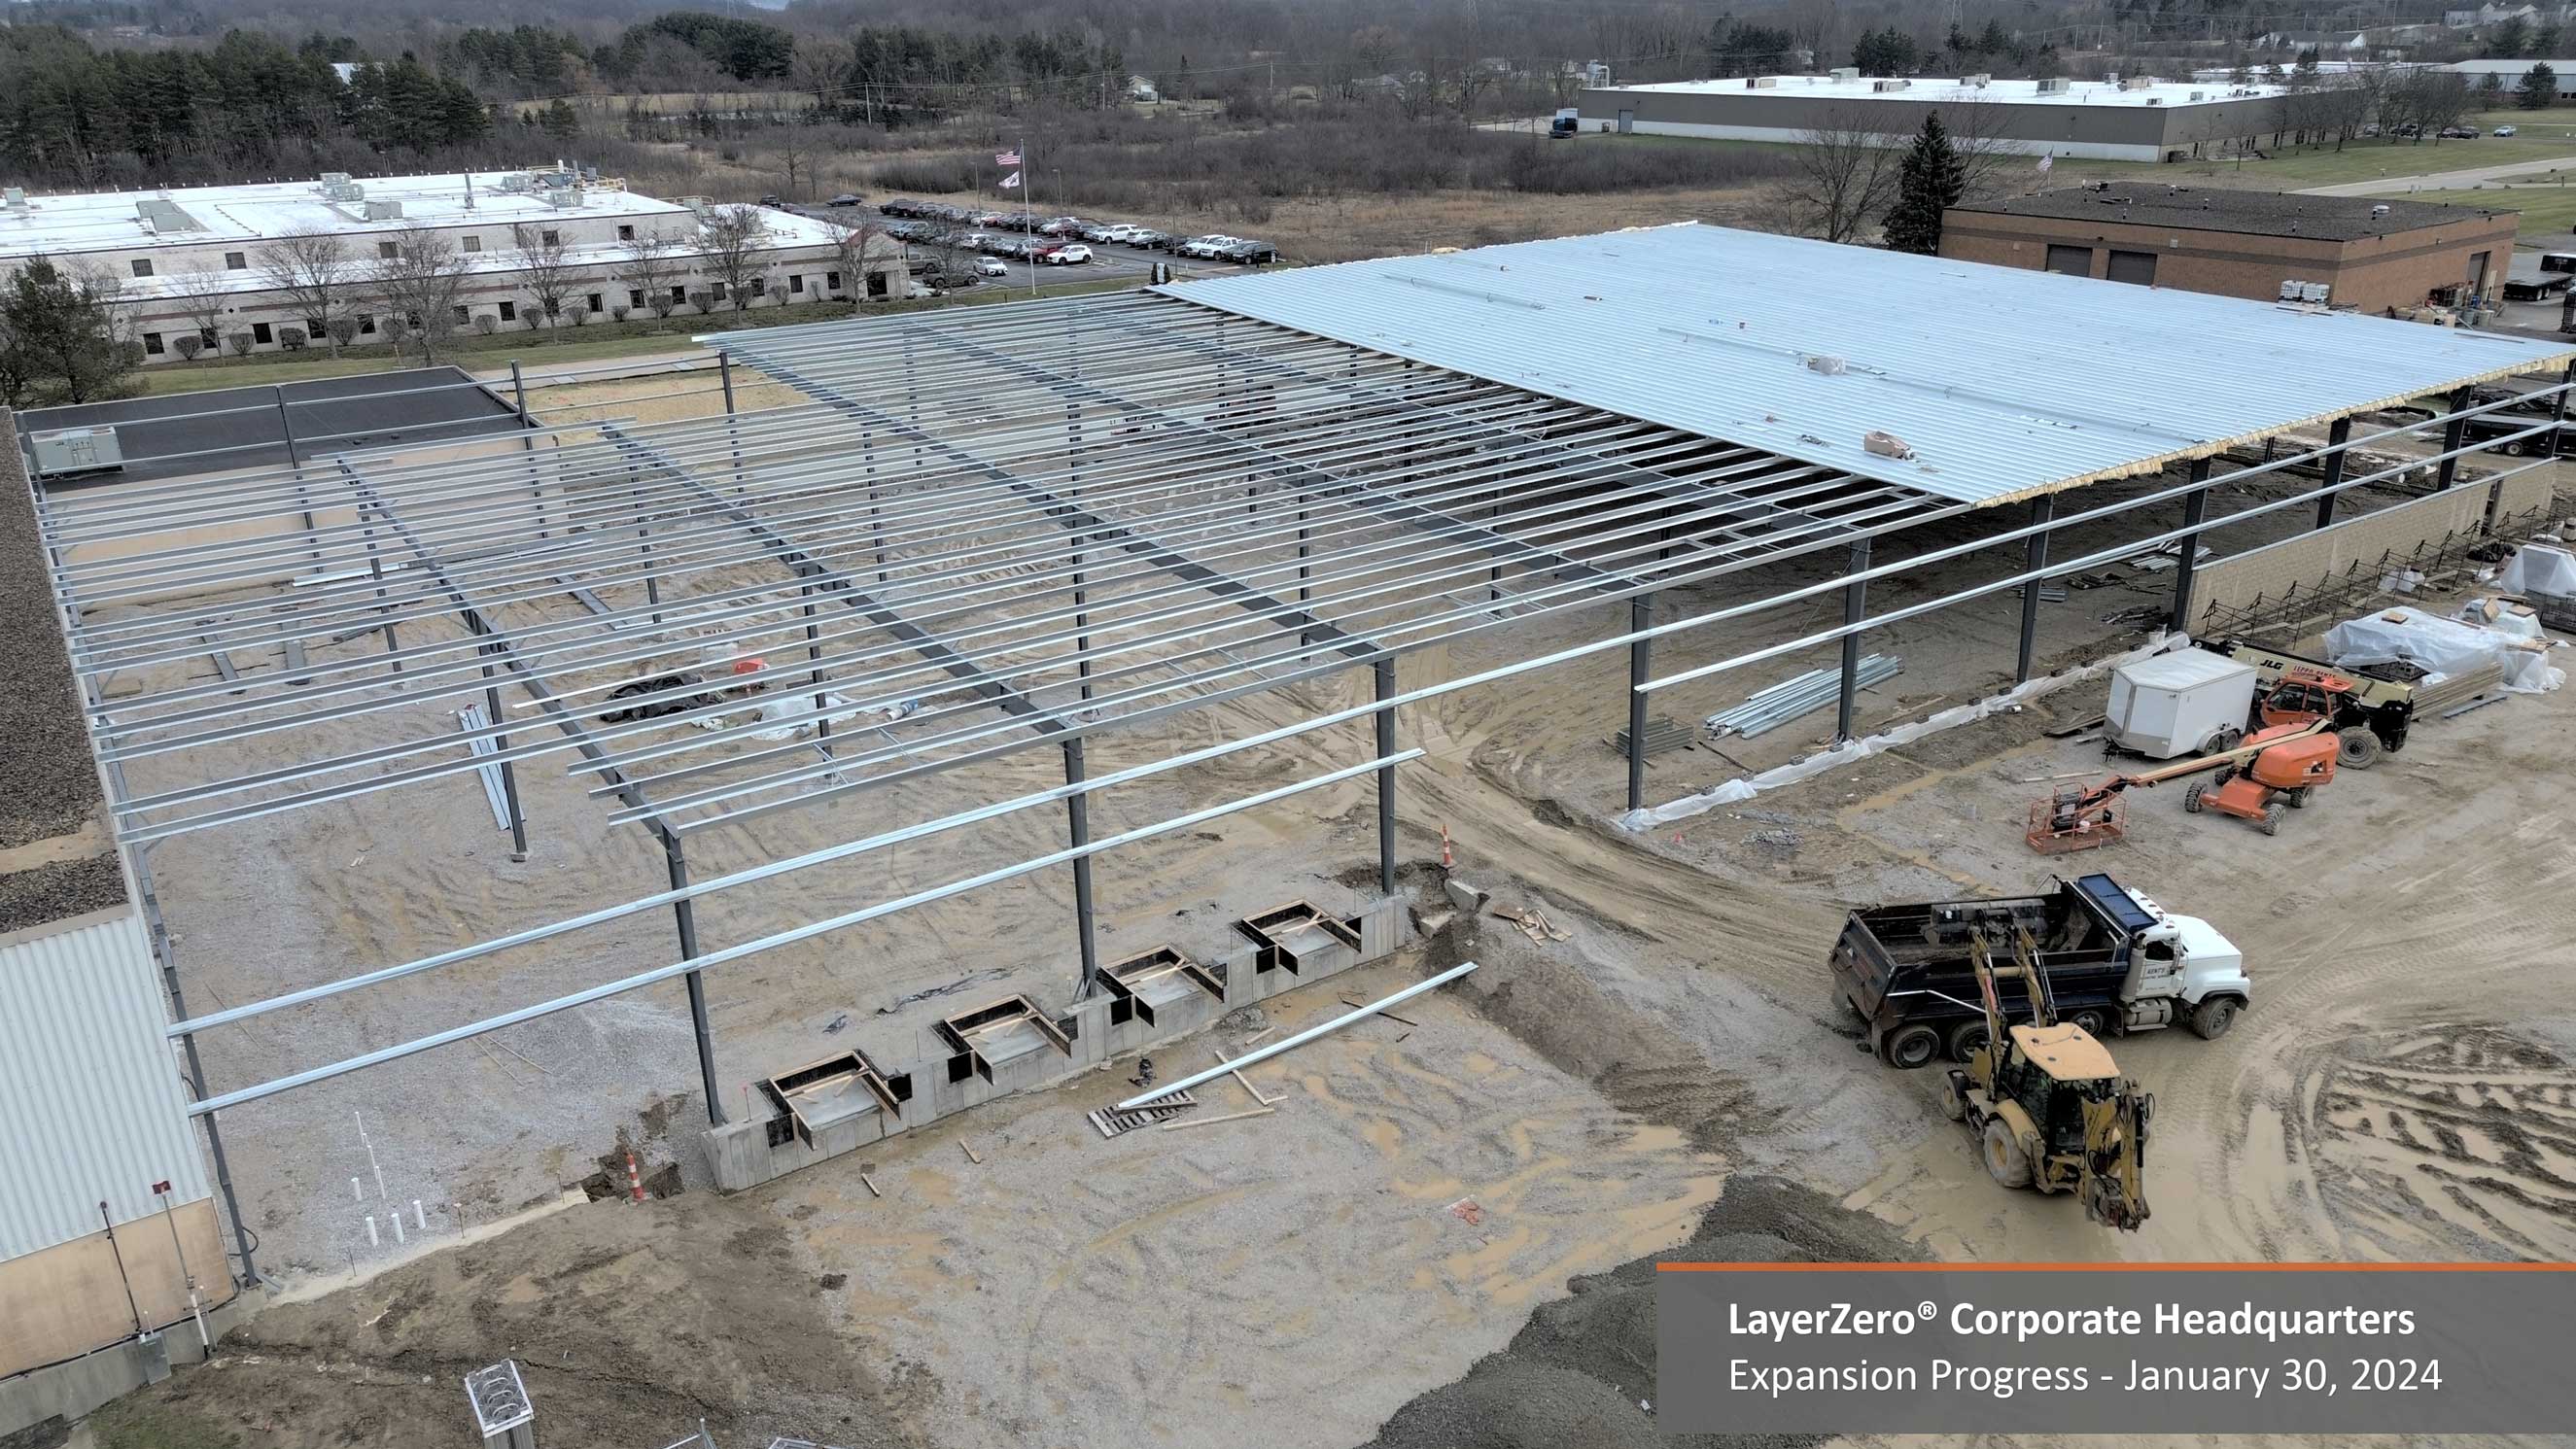 Roof installation progress continues at the LayerZero Expansion Project